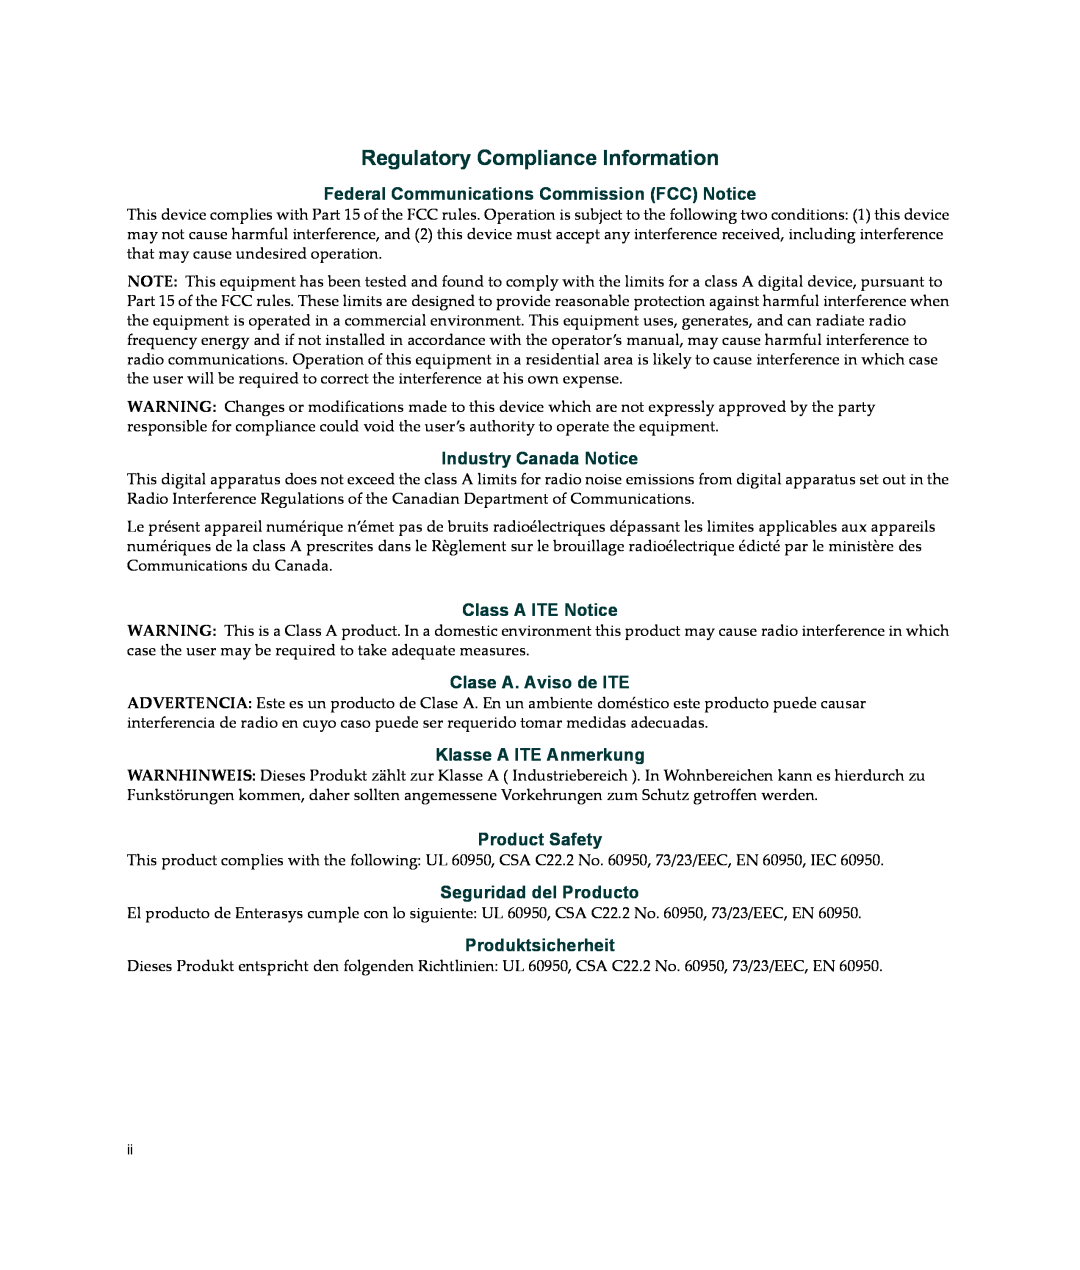 Enterasys Networks BL-6000ENT manual Regulatory Compliance Information, Federal Communications Commission FCC Notice 